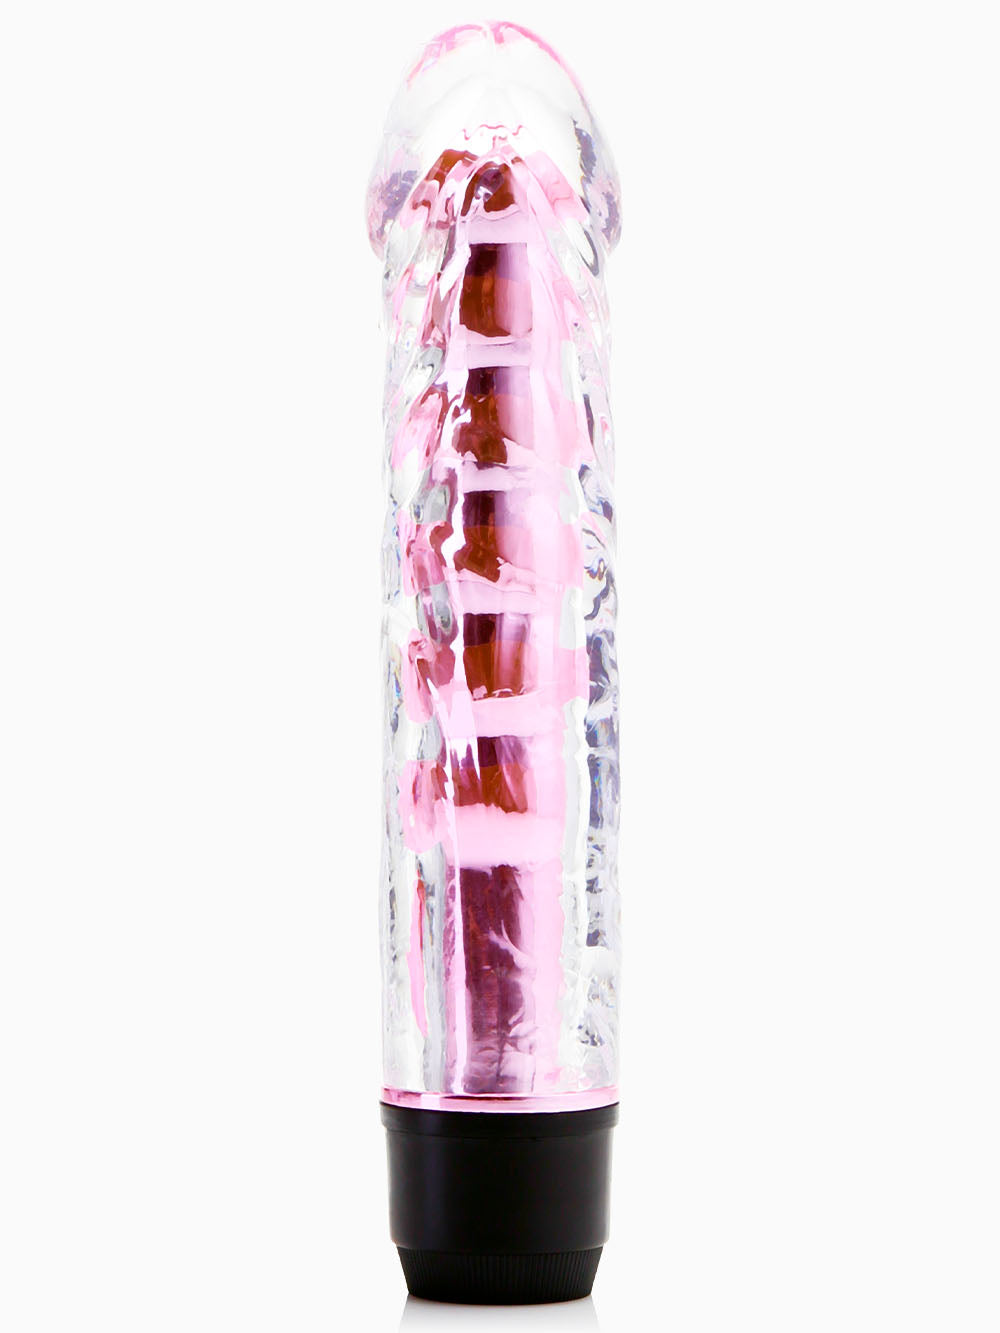 Pillow Talk Jelly Vibrating Dildo Pink, 6.5 Inches